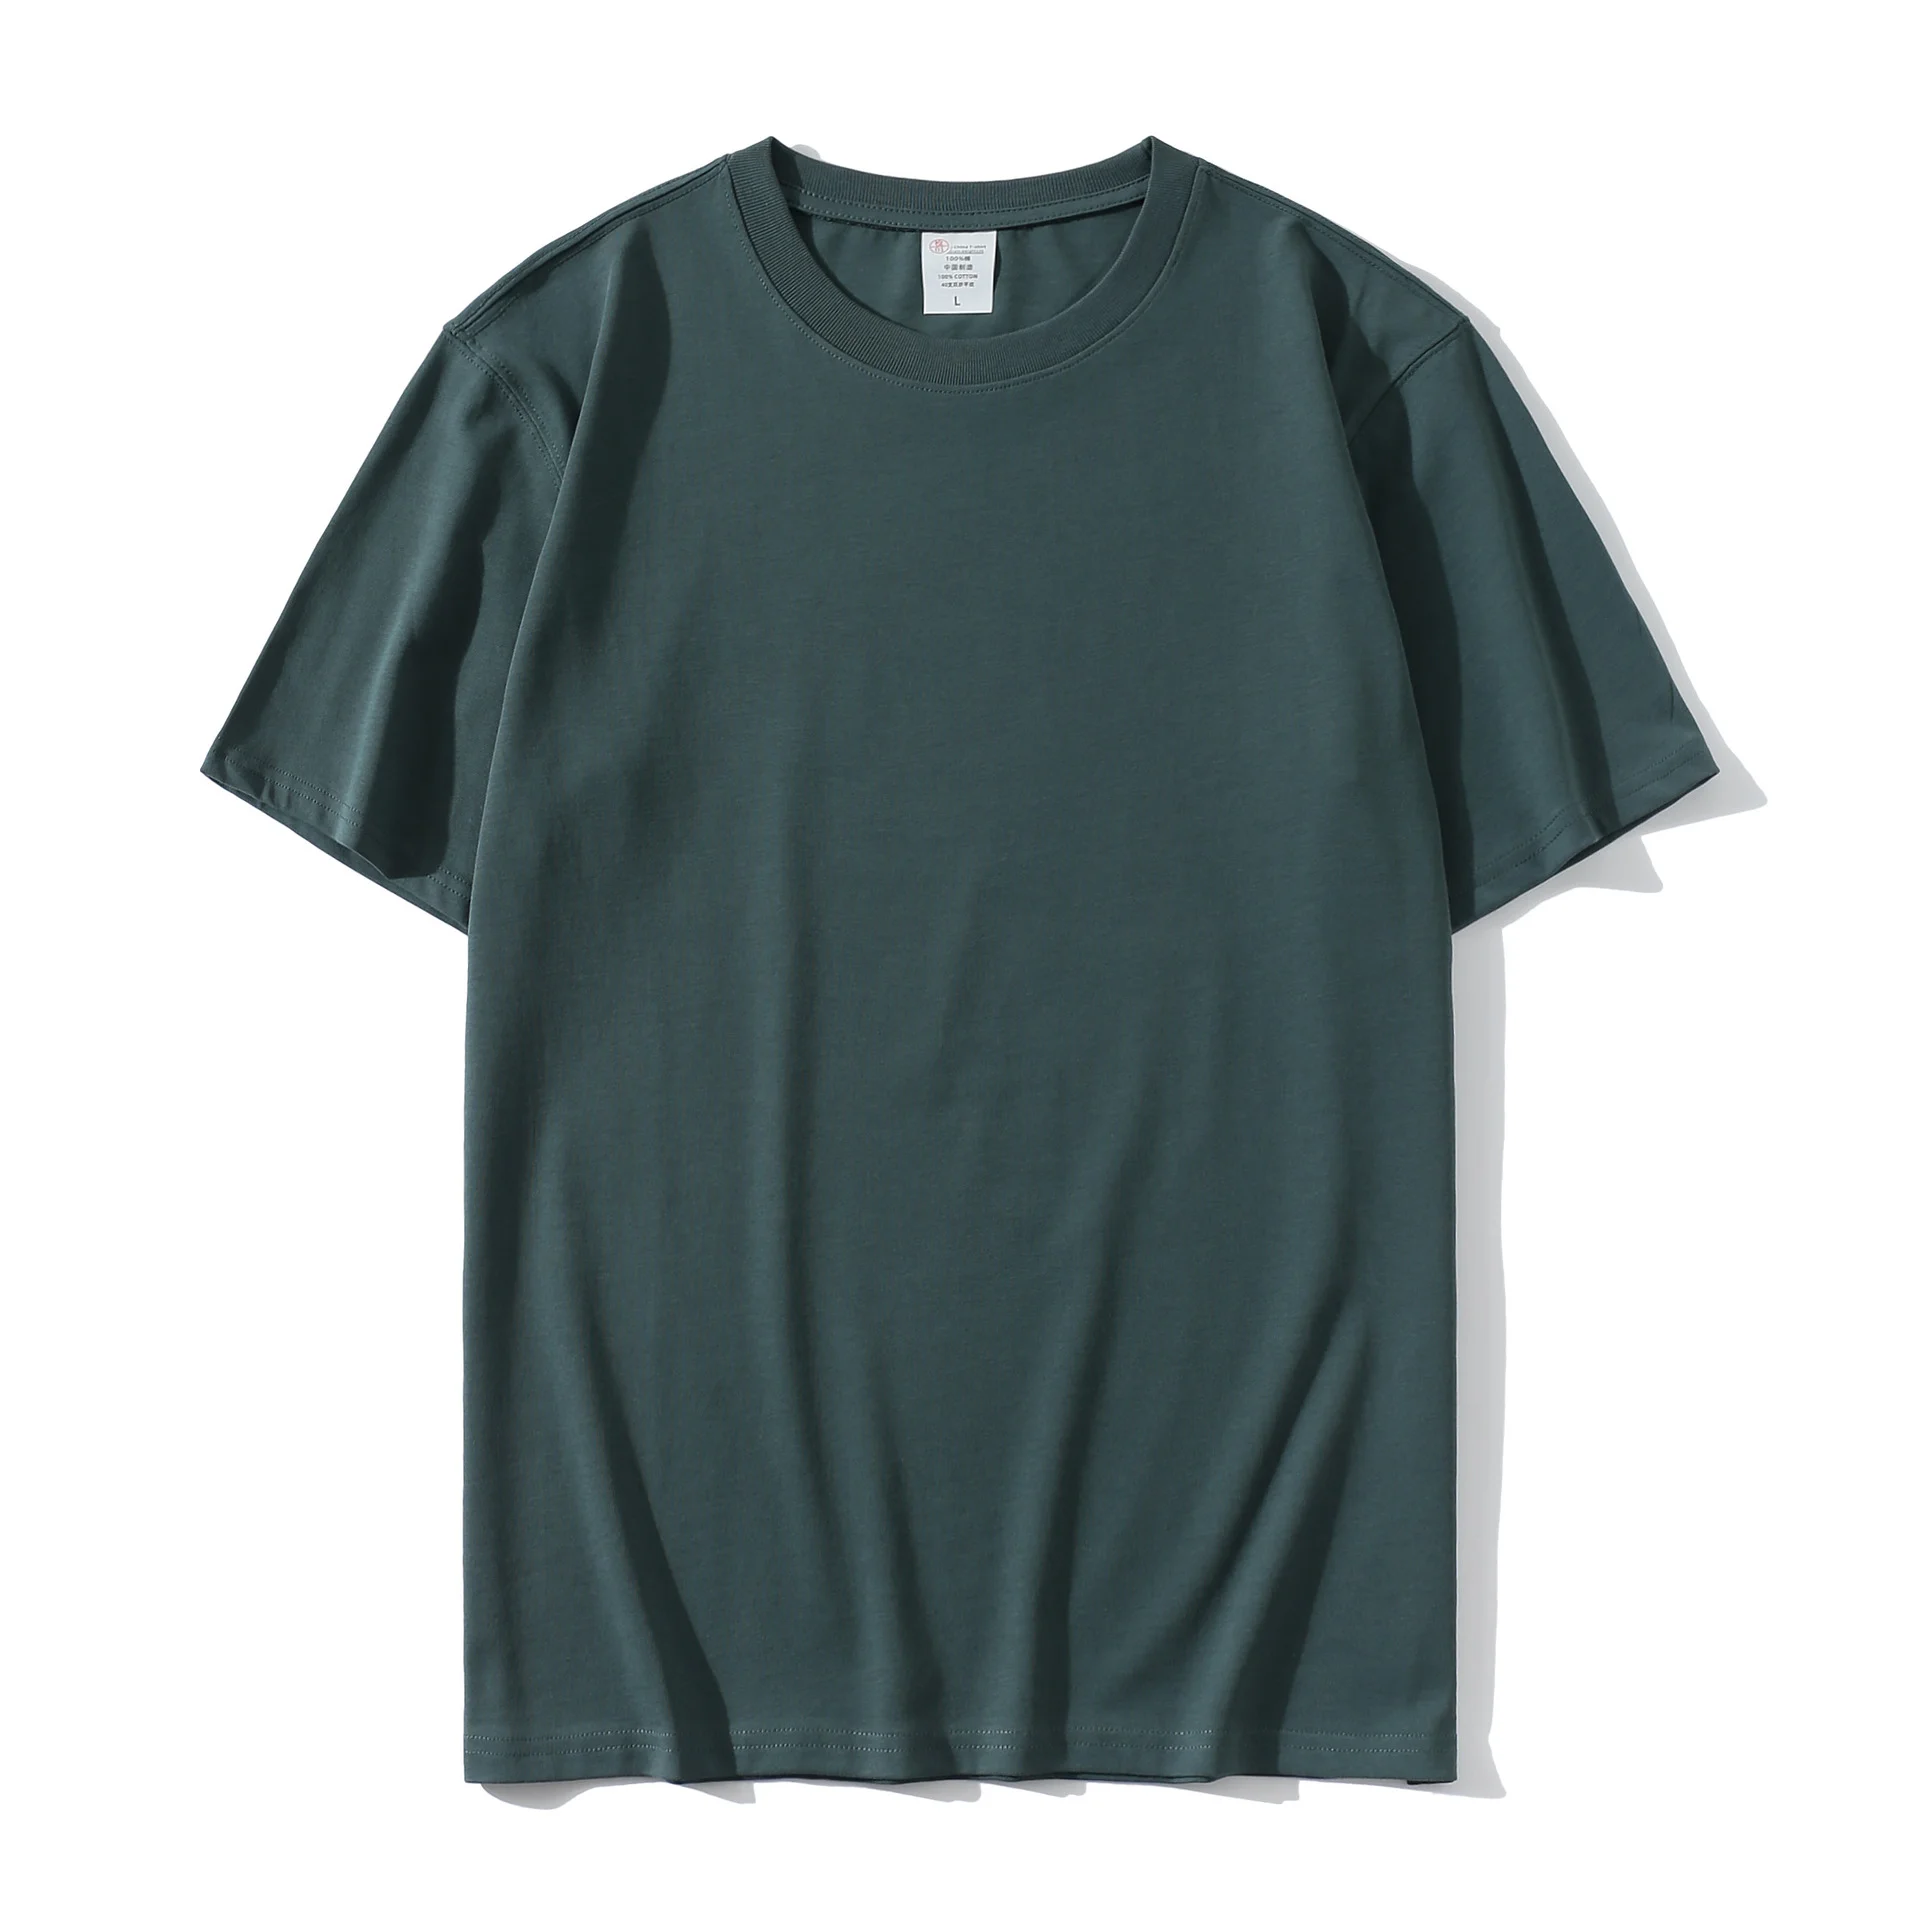 Wholesale Blank T shirts for Printing in Dhaka